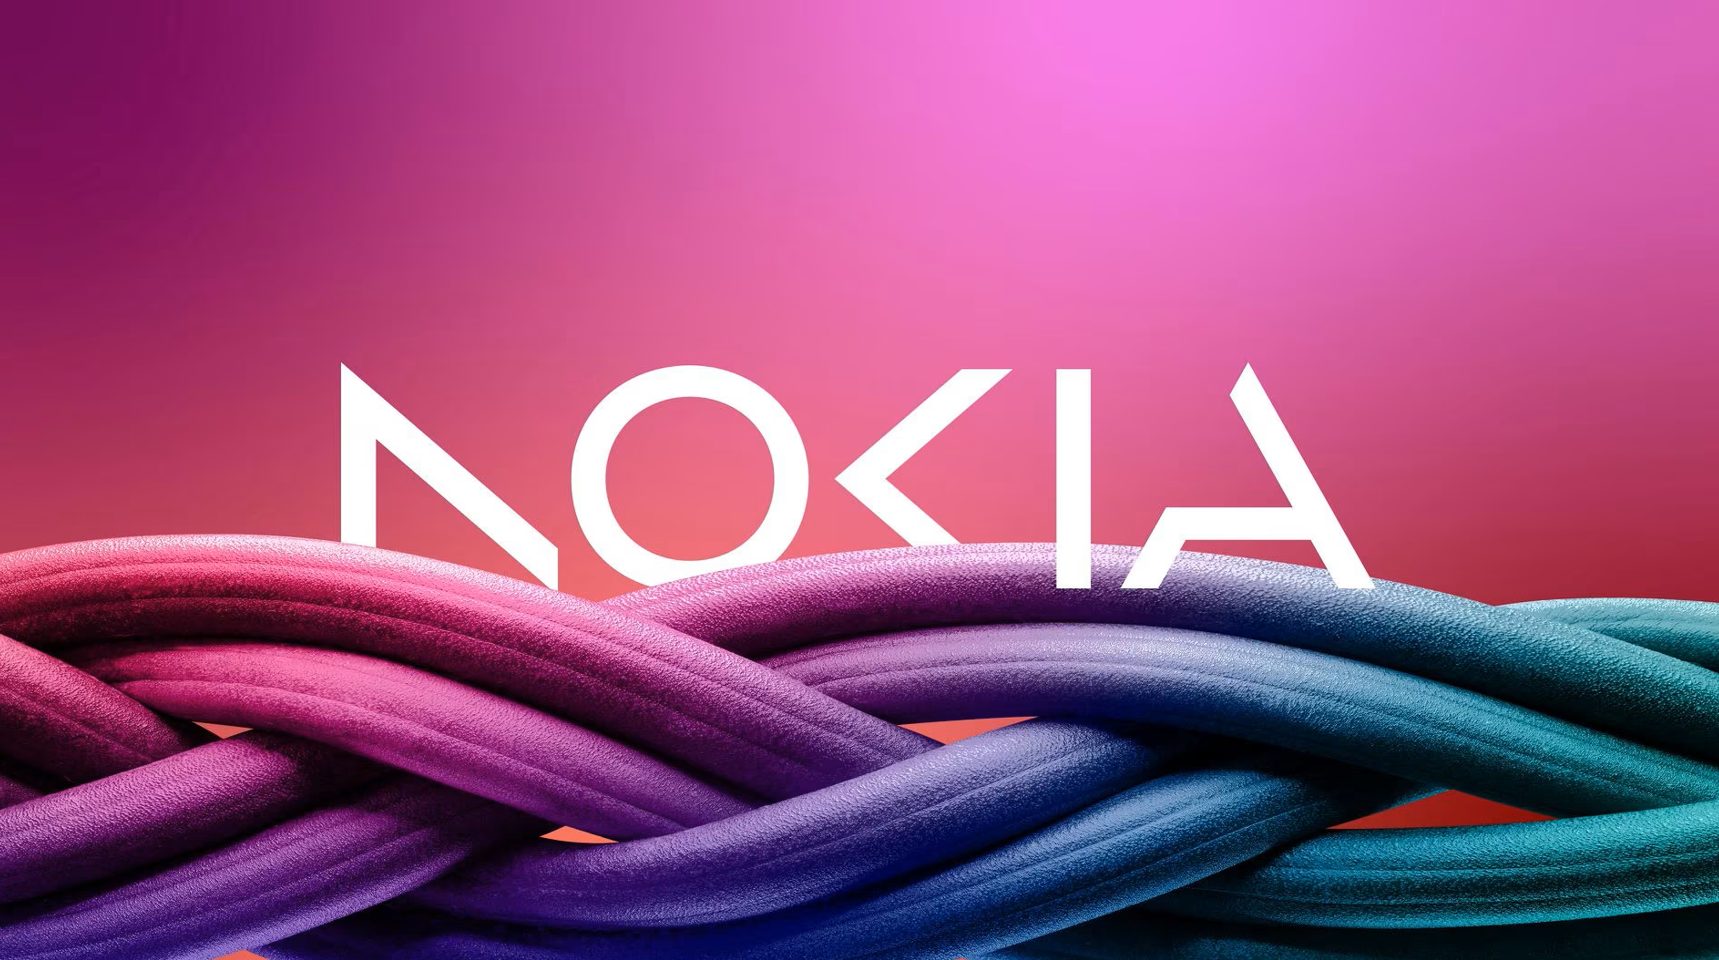 Nokia Changes To New Minimalist Logo, Rebrands Away From Mobile Phones 6